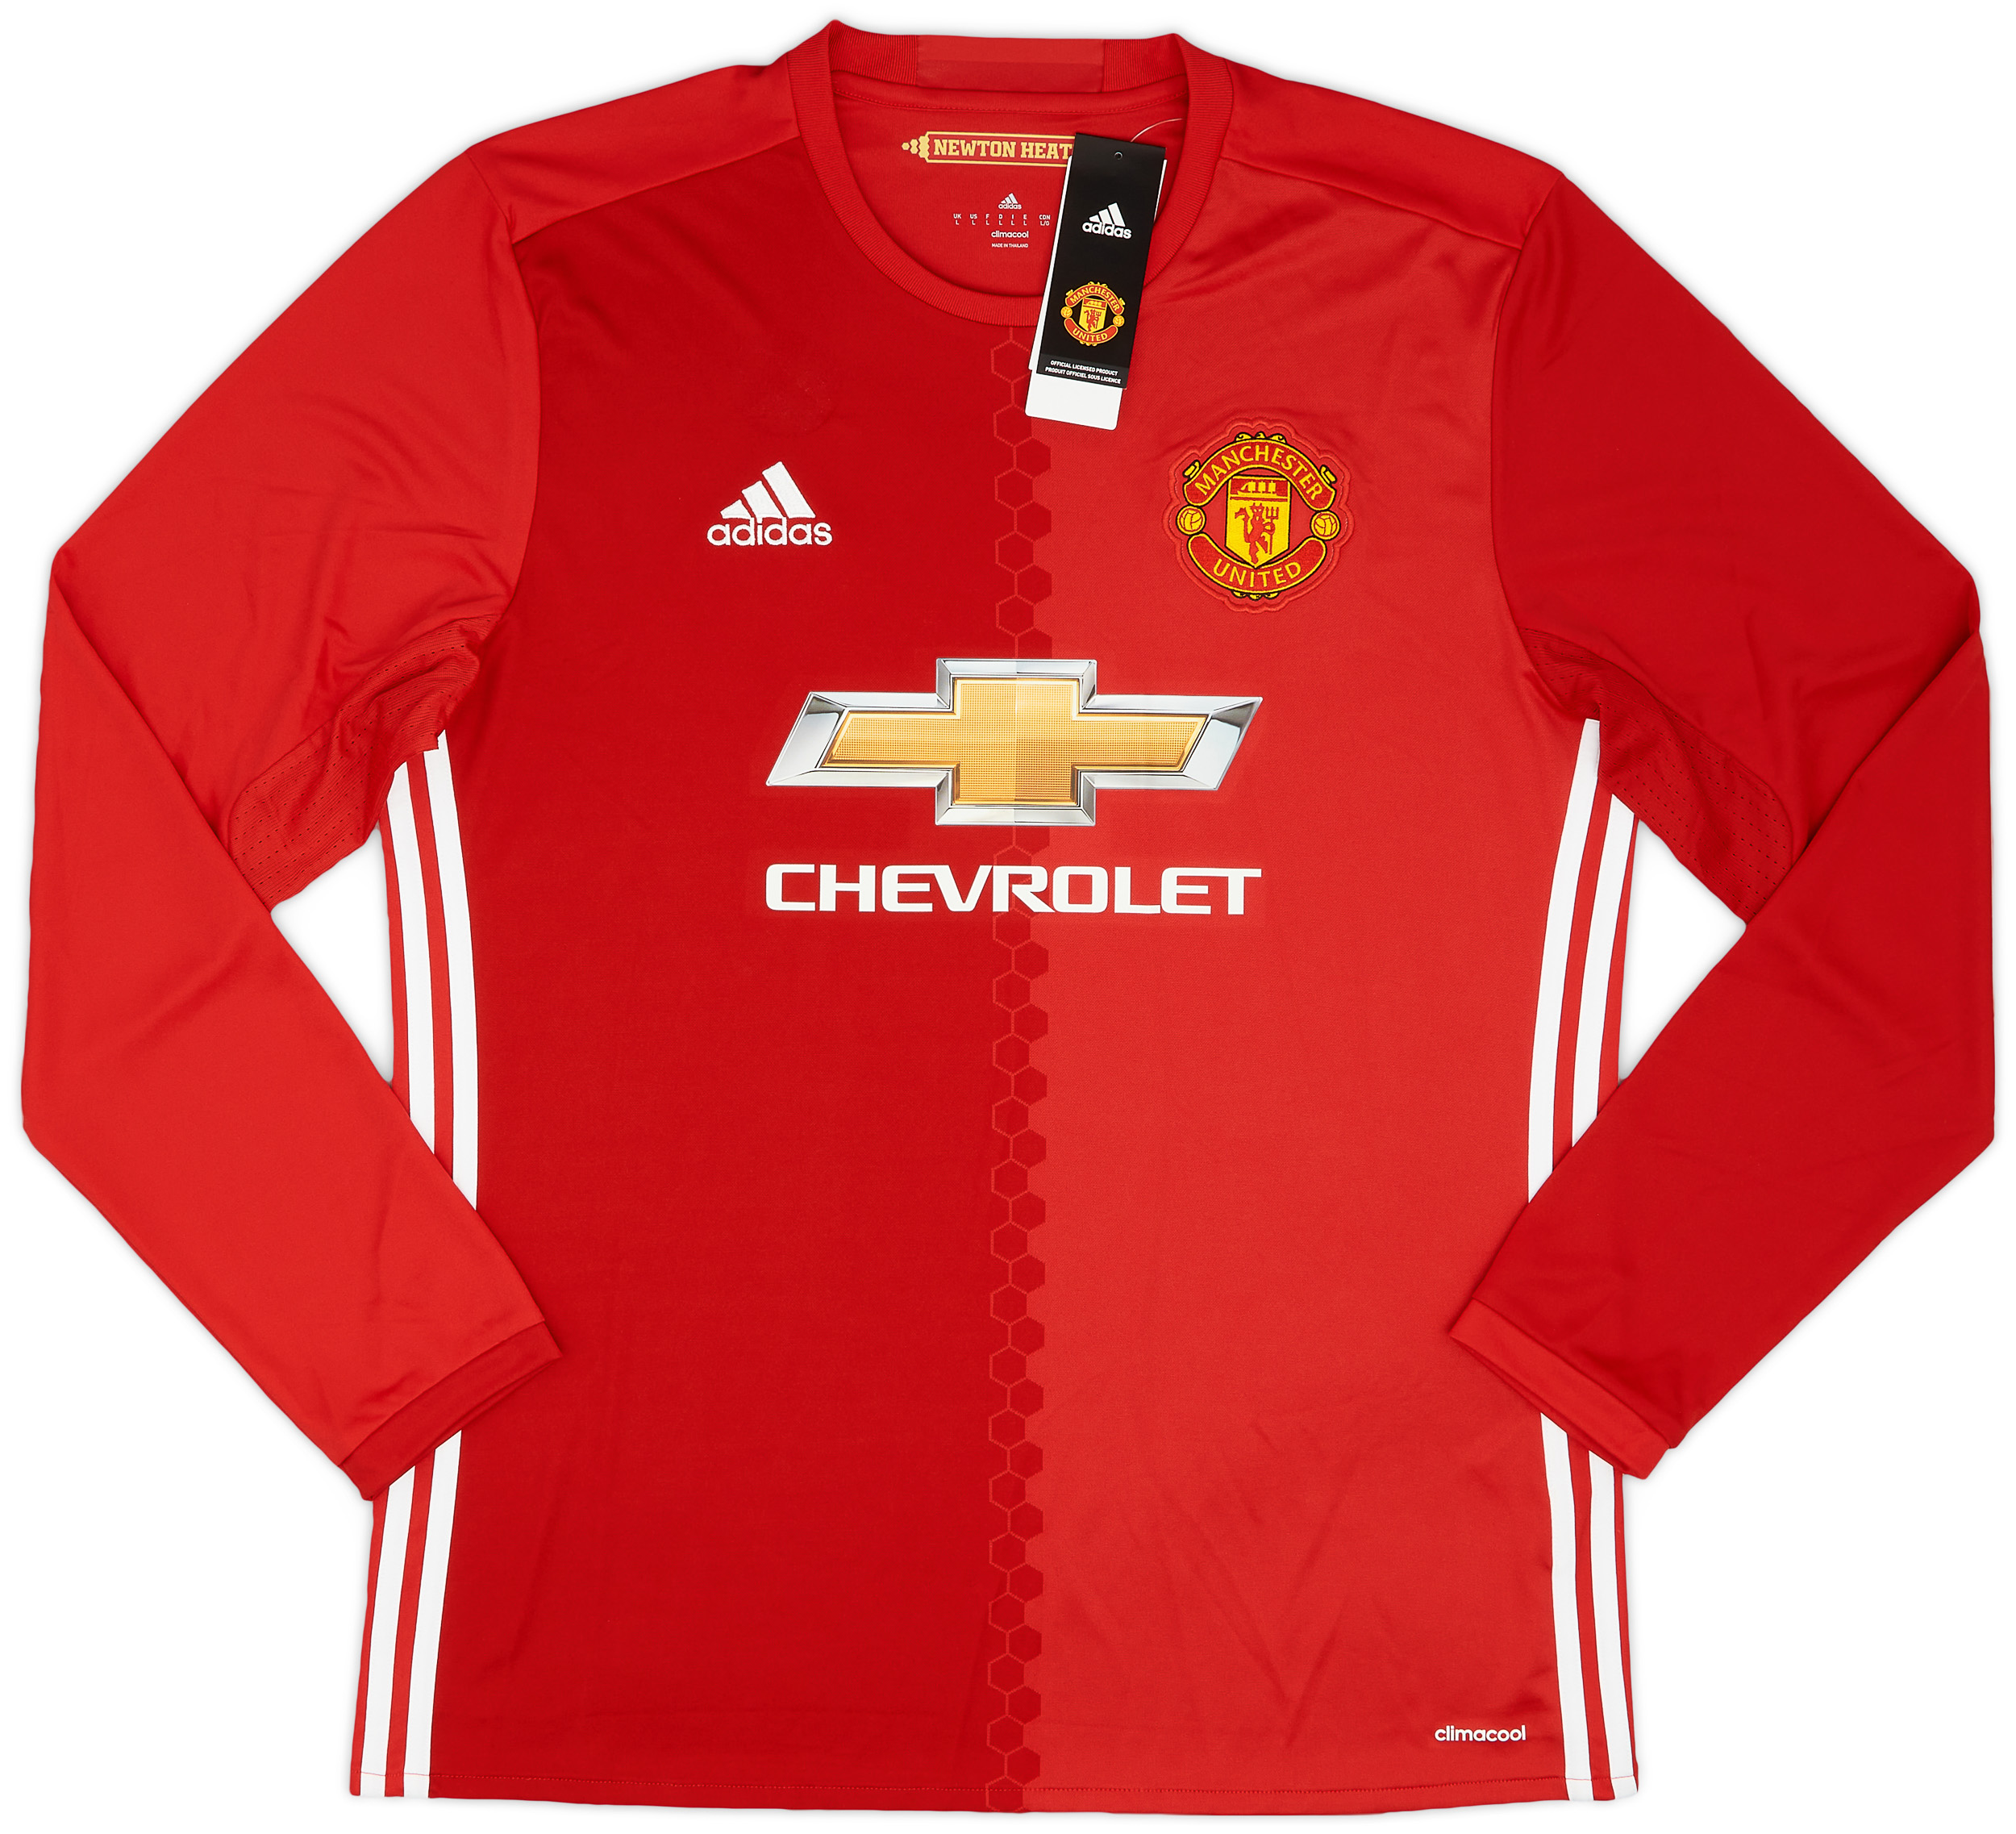 2016-17 Manchester United Home Shirt ()